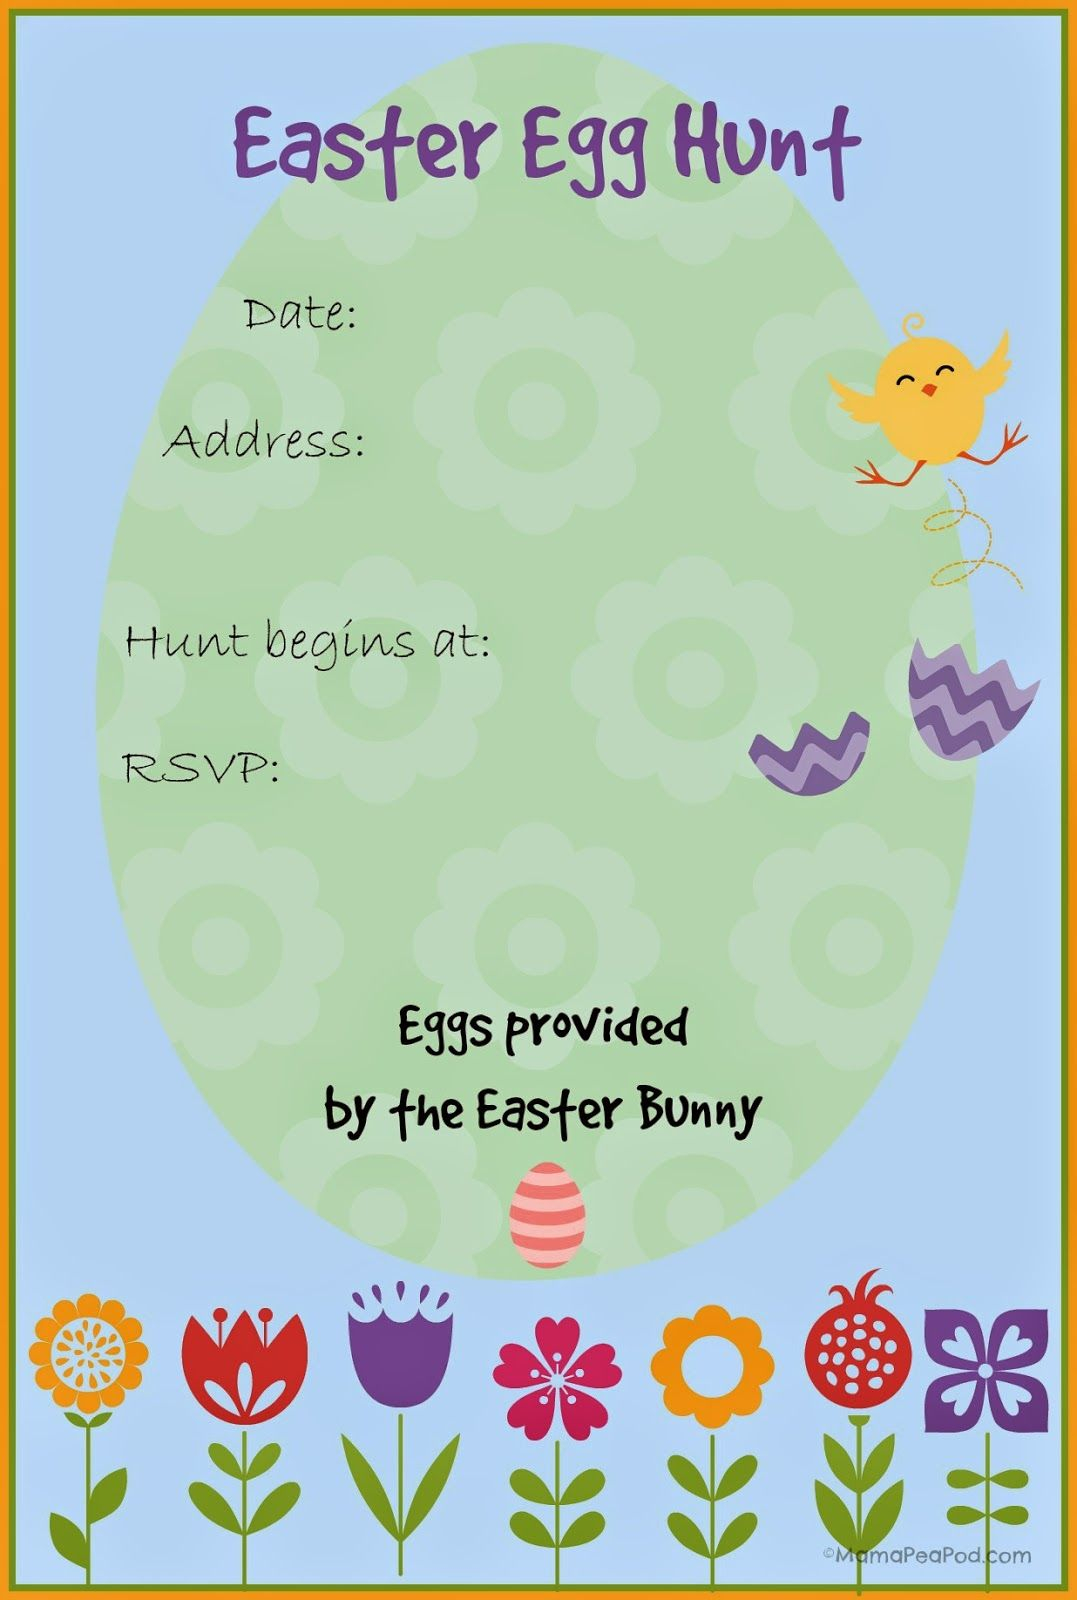 Easter Egg Hunt Invite Template • Business Template Ideas